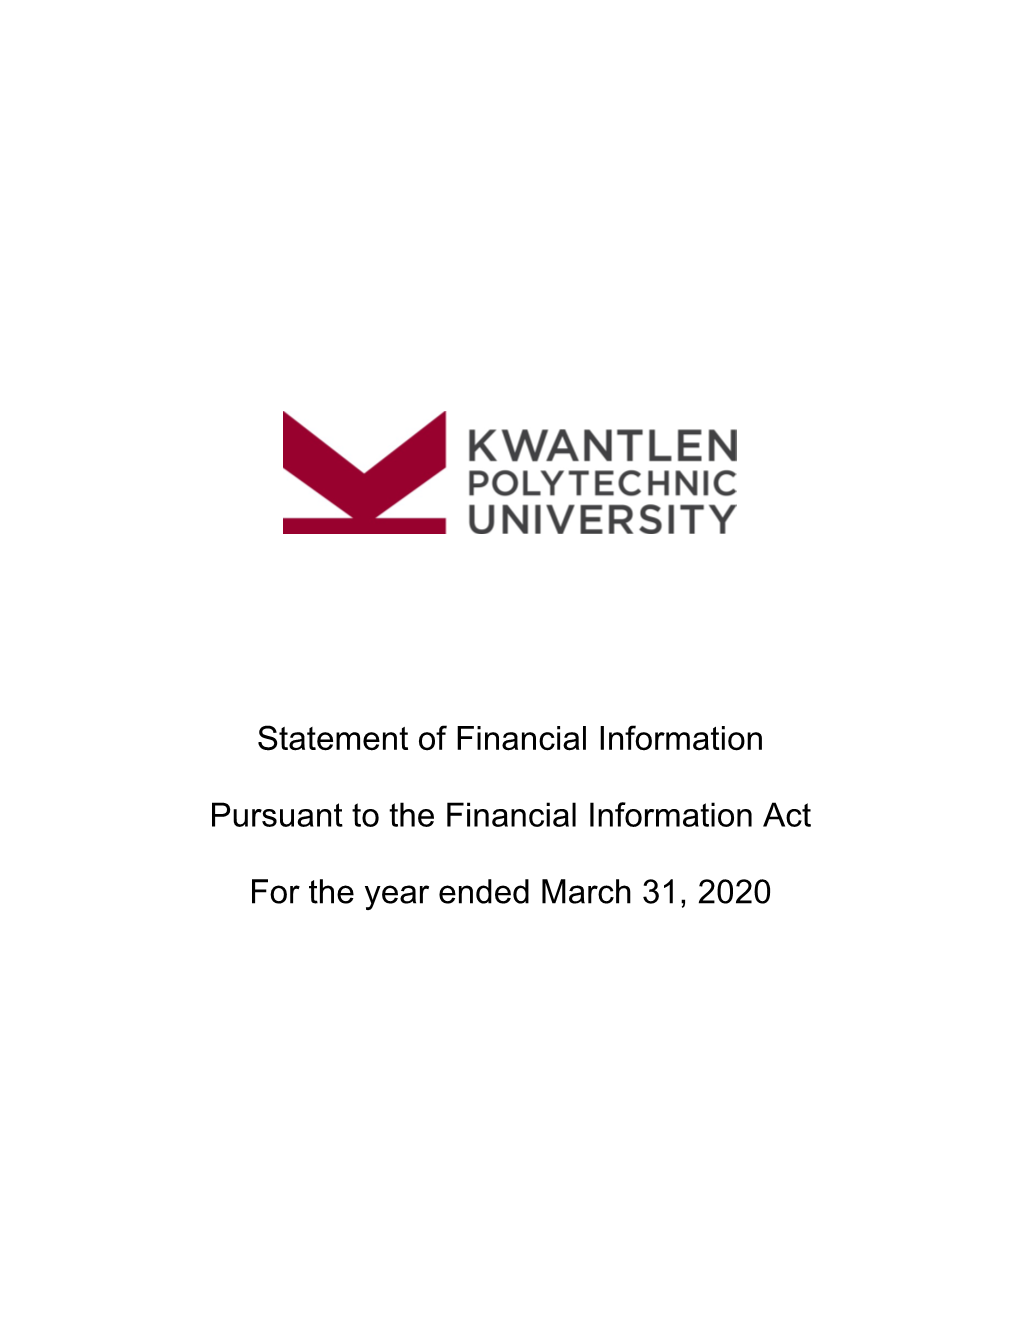 Statement of Financial Information Pursuant to the Financial Information Act for the Year Ended March 31, 2020